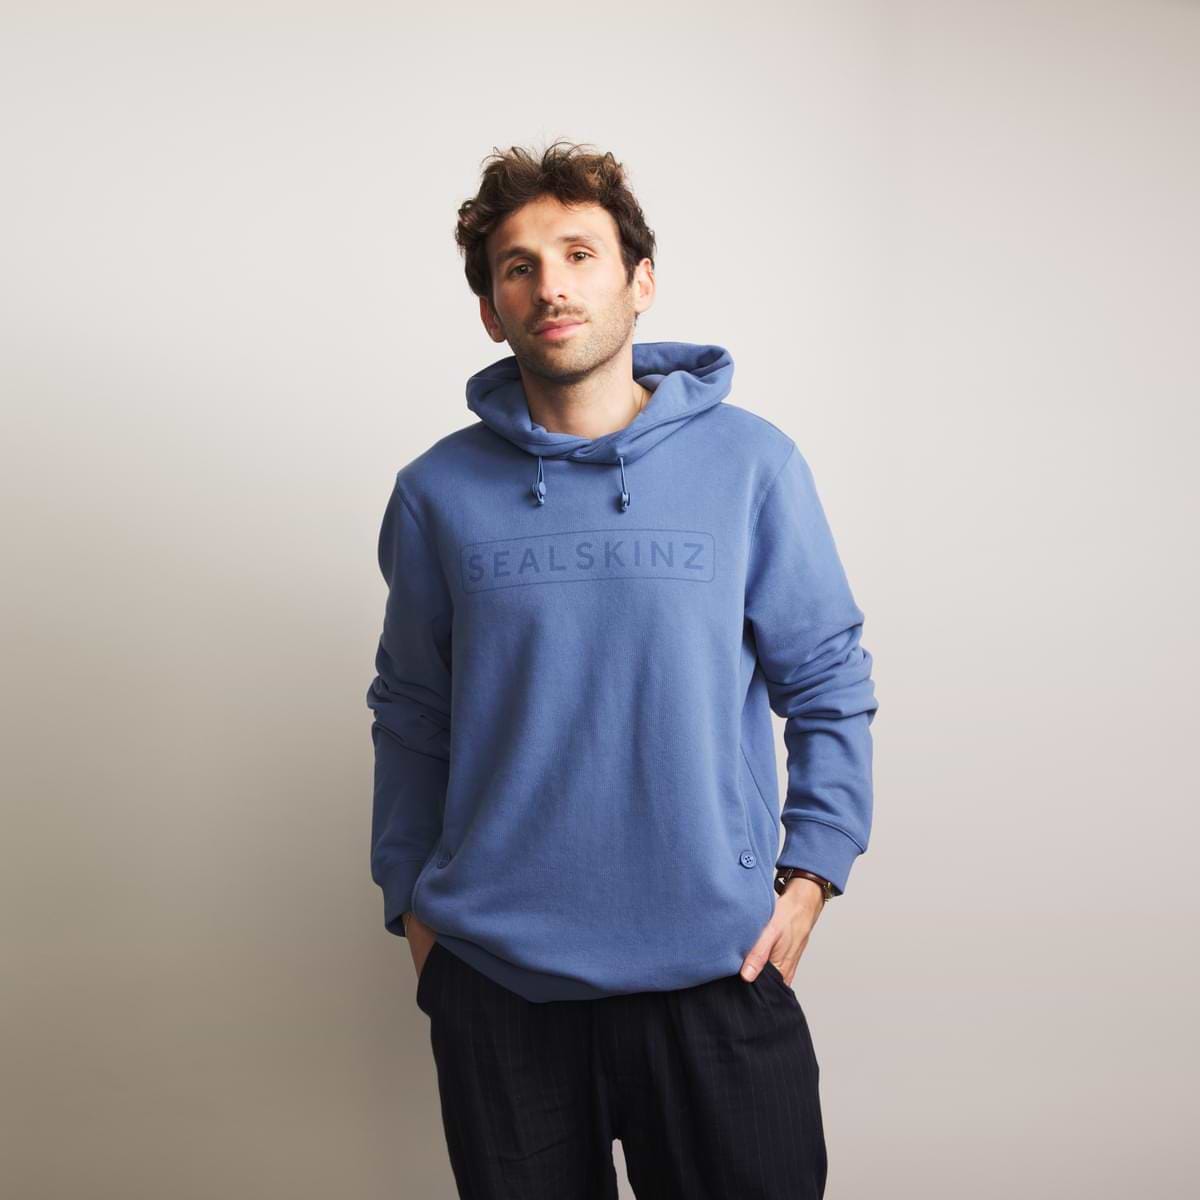 Men's fitness hoodie - the perfect sweatshirt for running or working out.